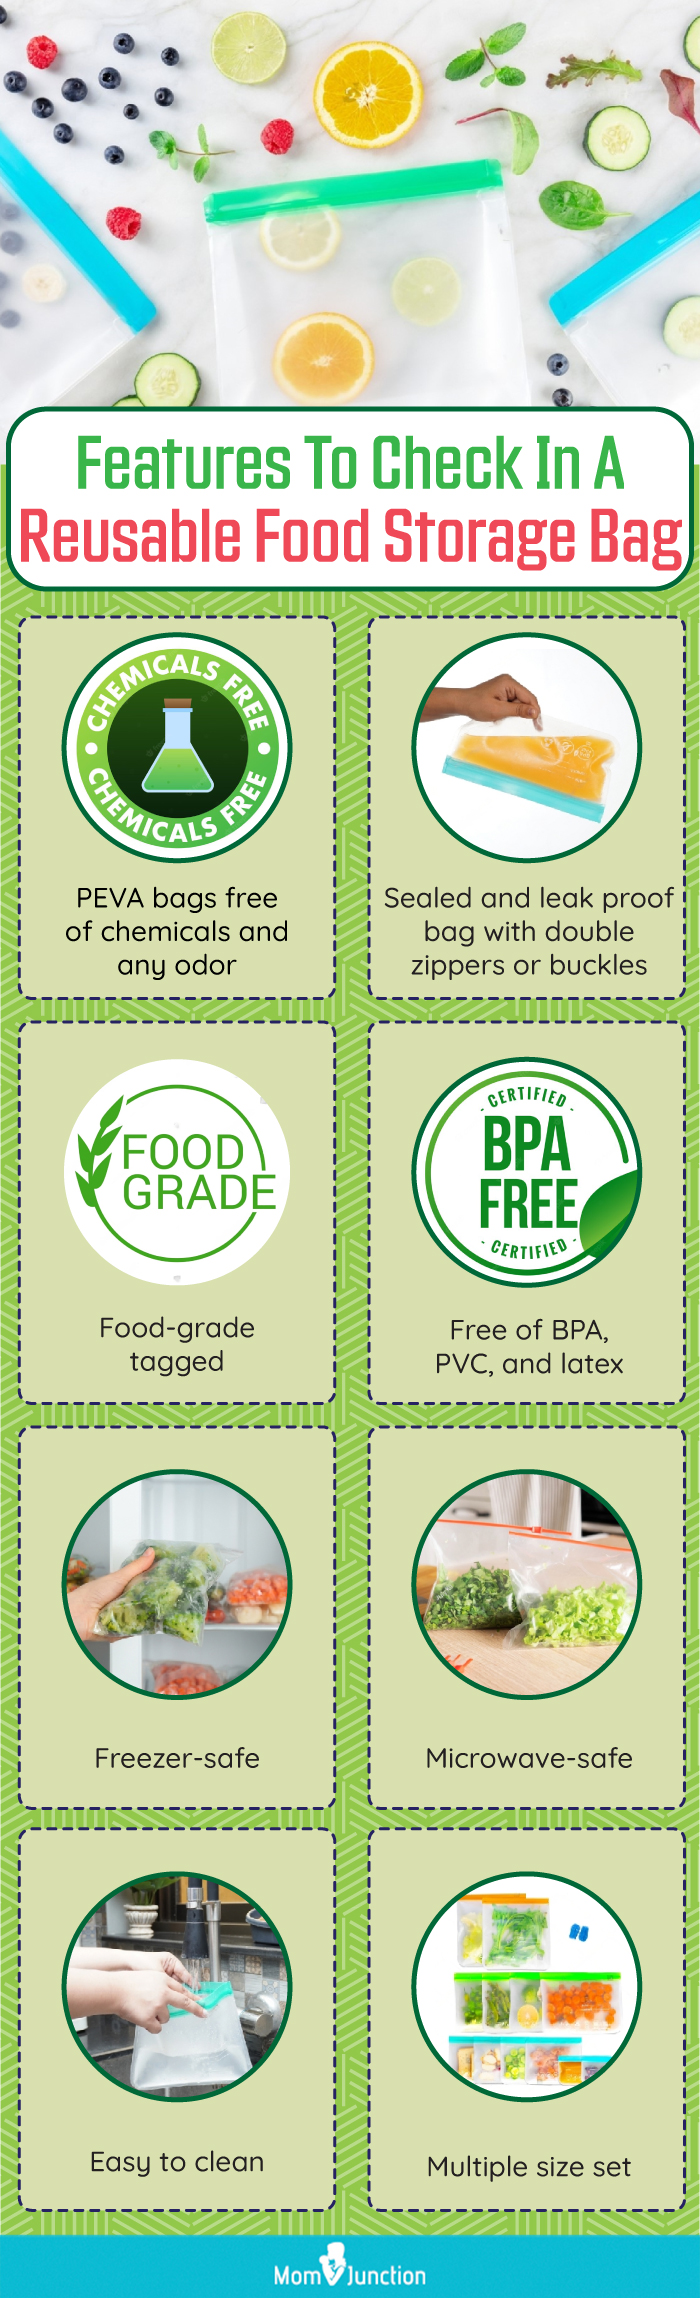 Features To Check In A Reusable Food Storage Bag (infographic)